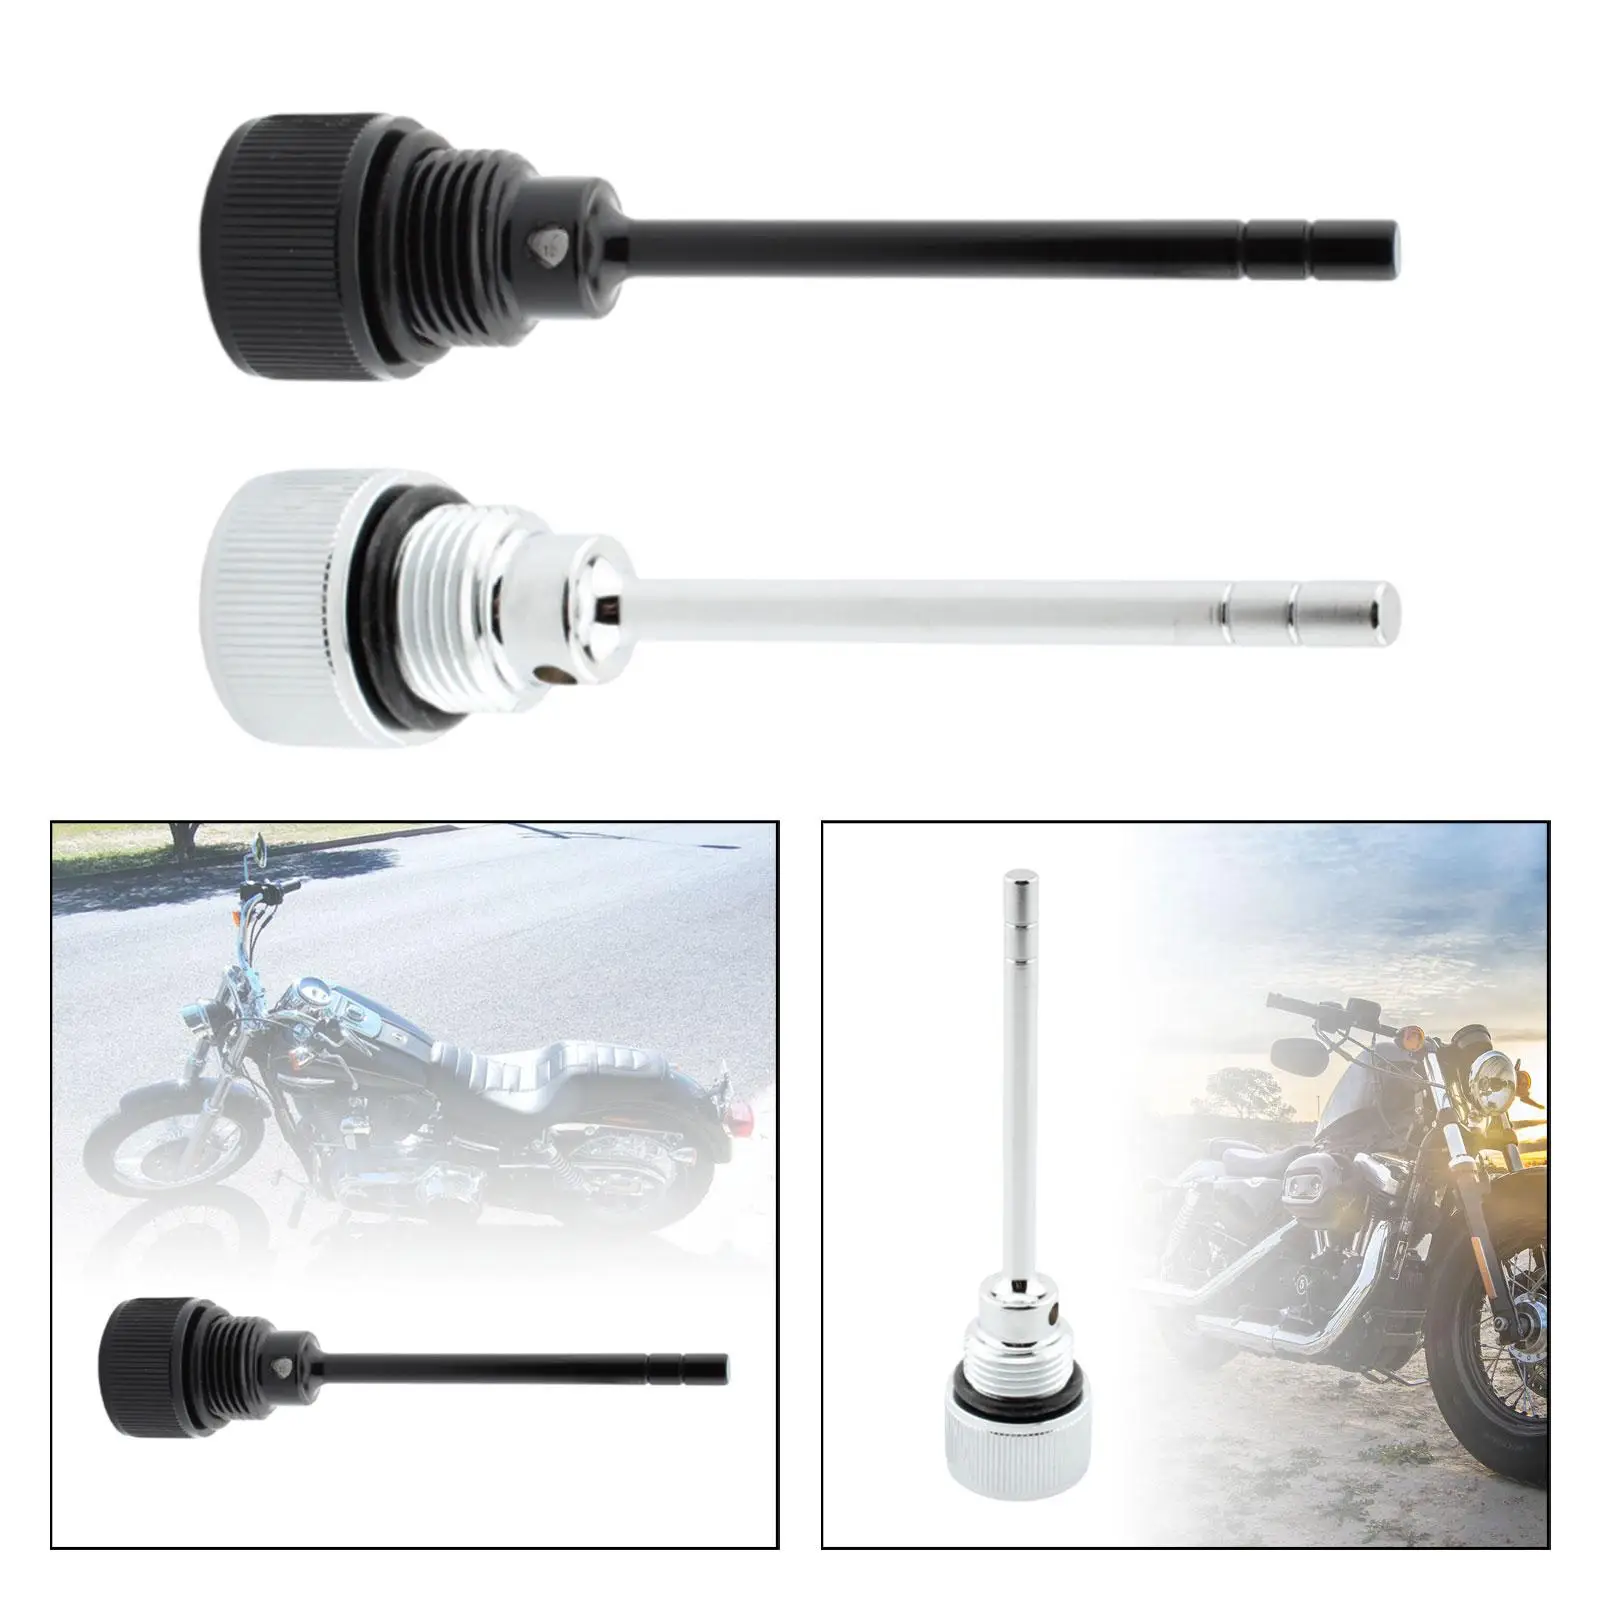 Transmission Oil Fill Plug Dipstick Easy Installation Repair Parts Accessories for Fxs Breakout Fxbr Classic Efi Flhtci